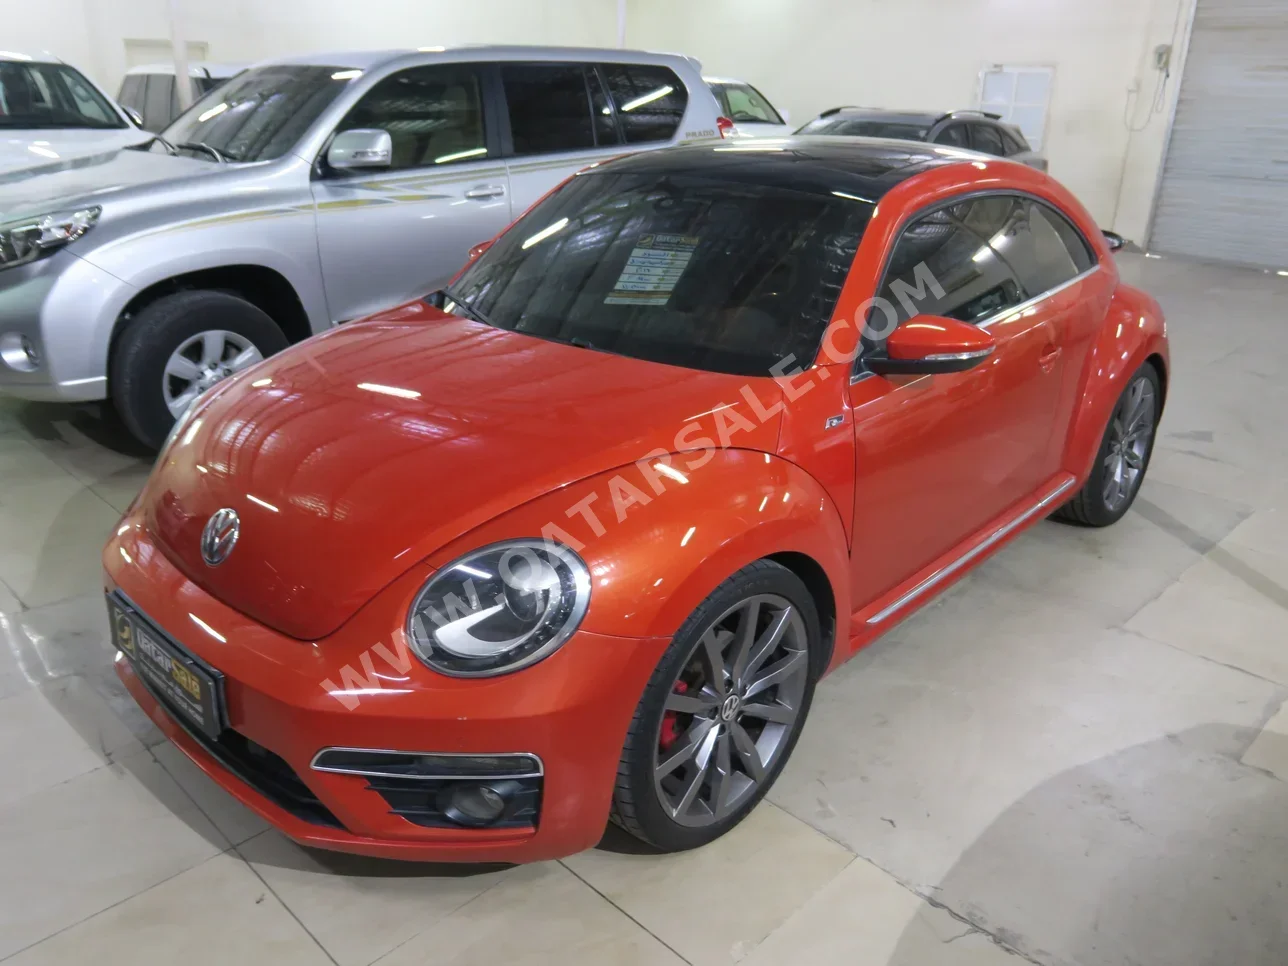 Volkswagen  Beetle  Turbo  2016  Automatic  84,000 Km  4 Cylinder  Front Wheel Drive (FWD)  Hatchback  Red